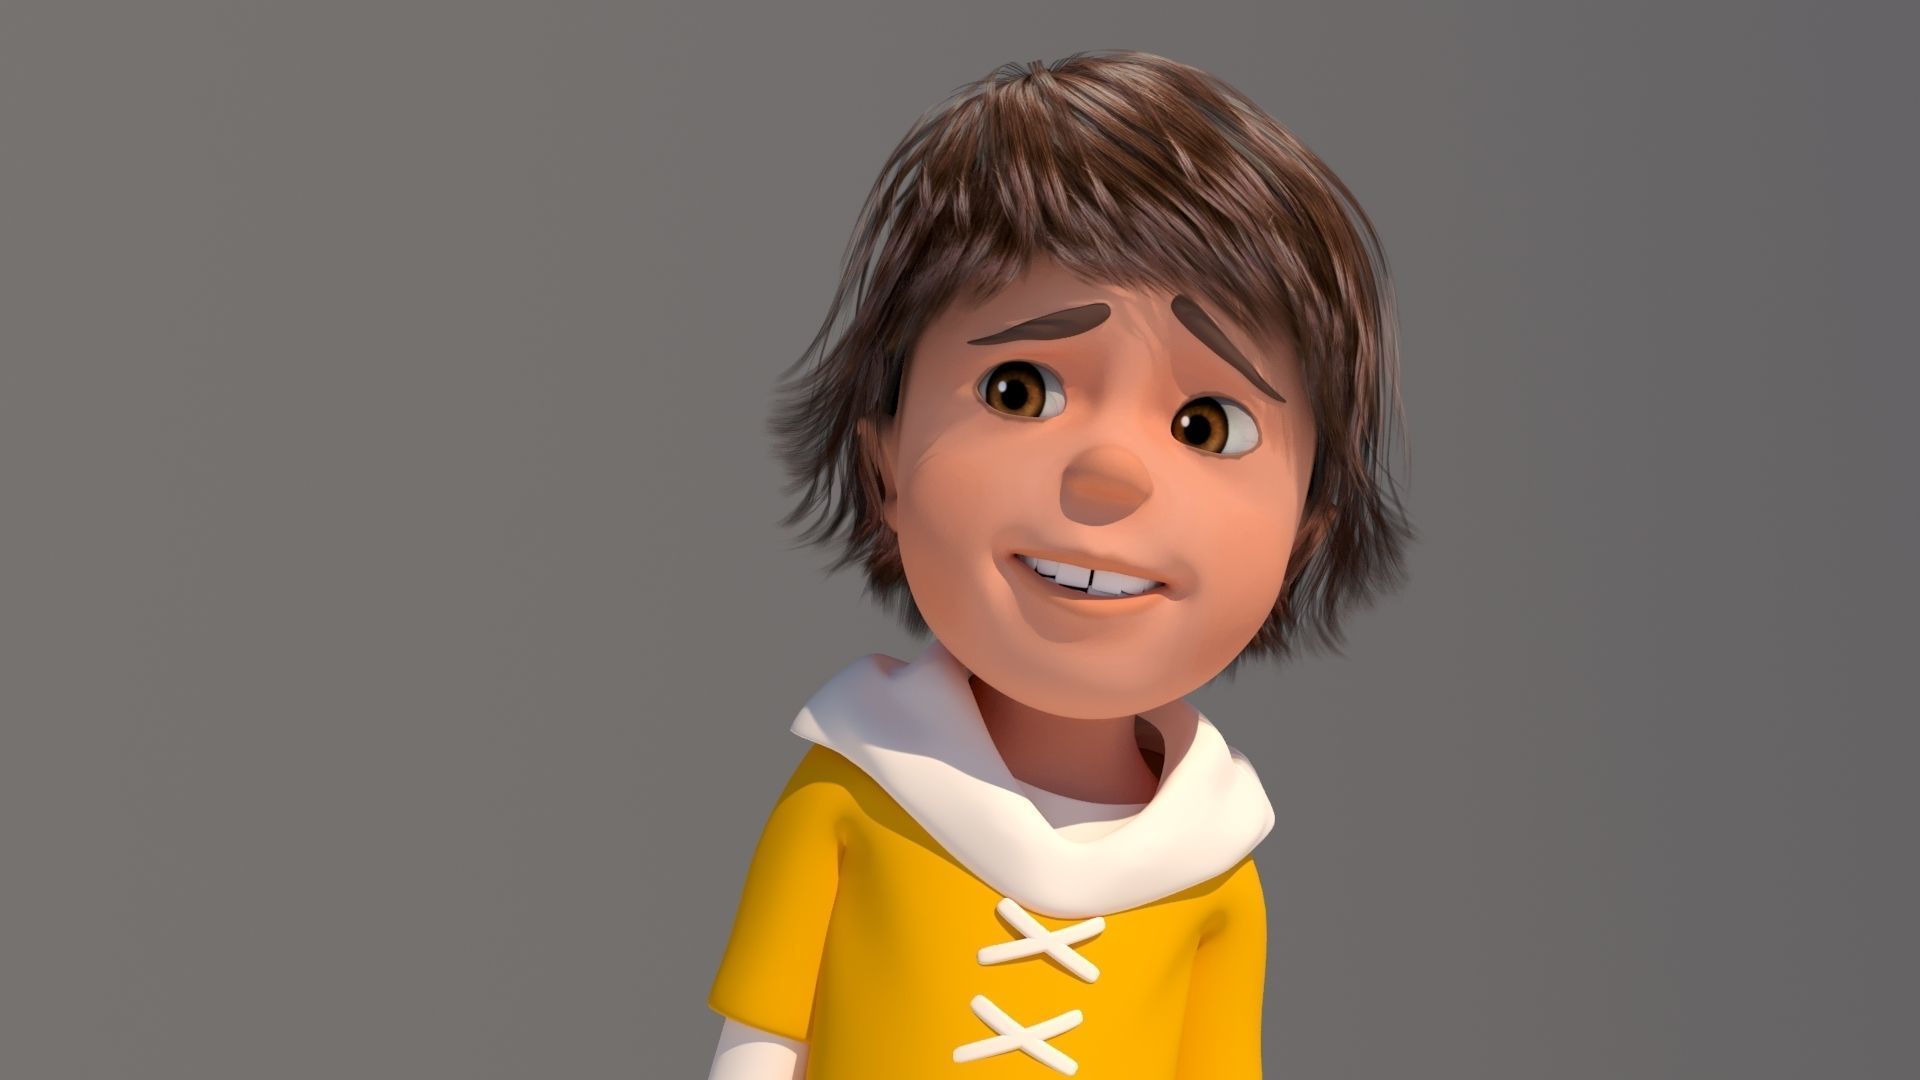 TOON CHARACTER PACK - 21 RIGGED CHAR 3D model - Model 3D Download For Free 12